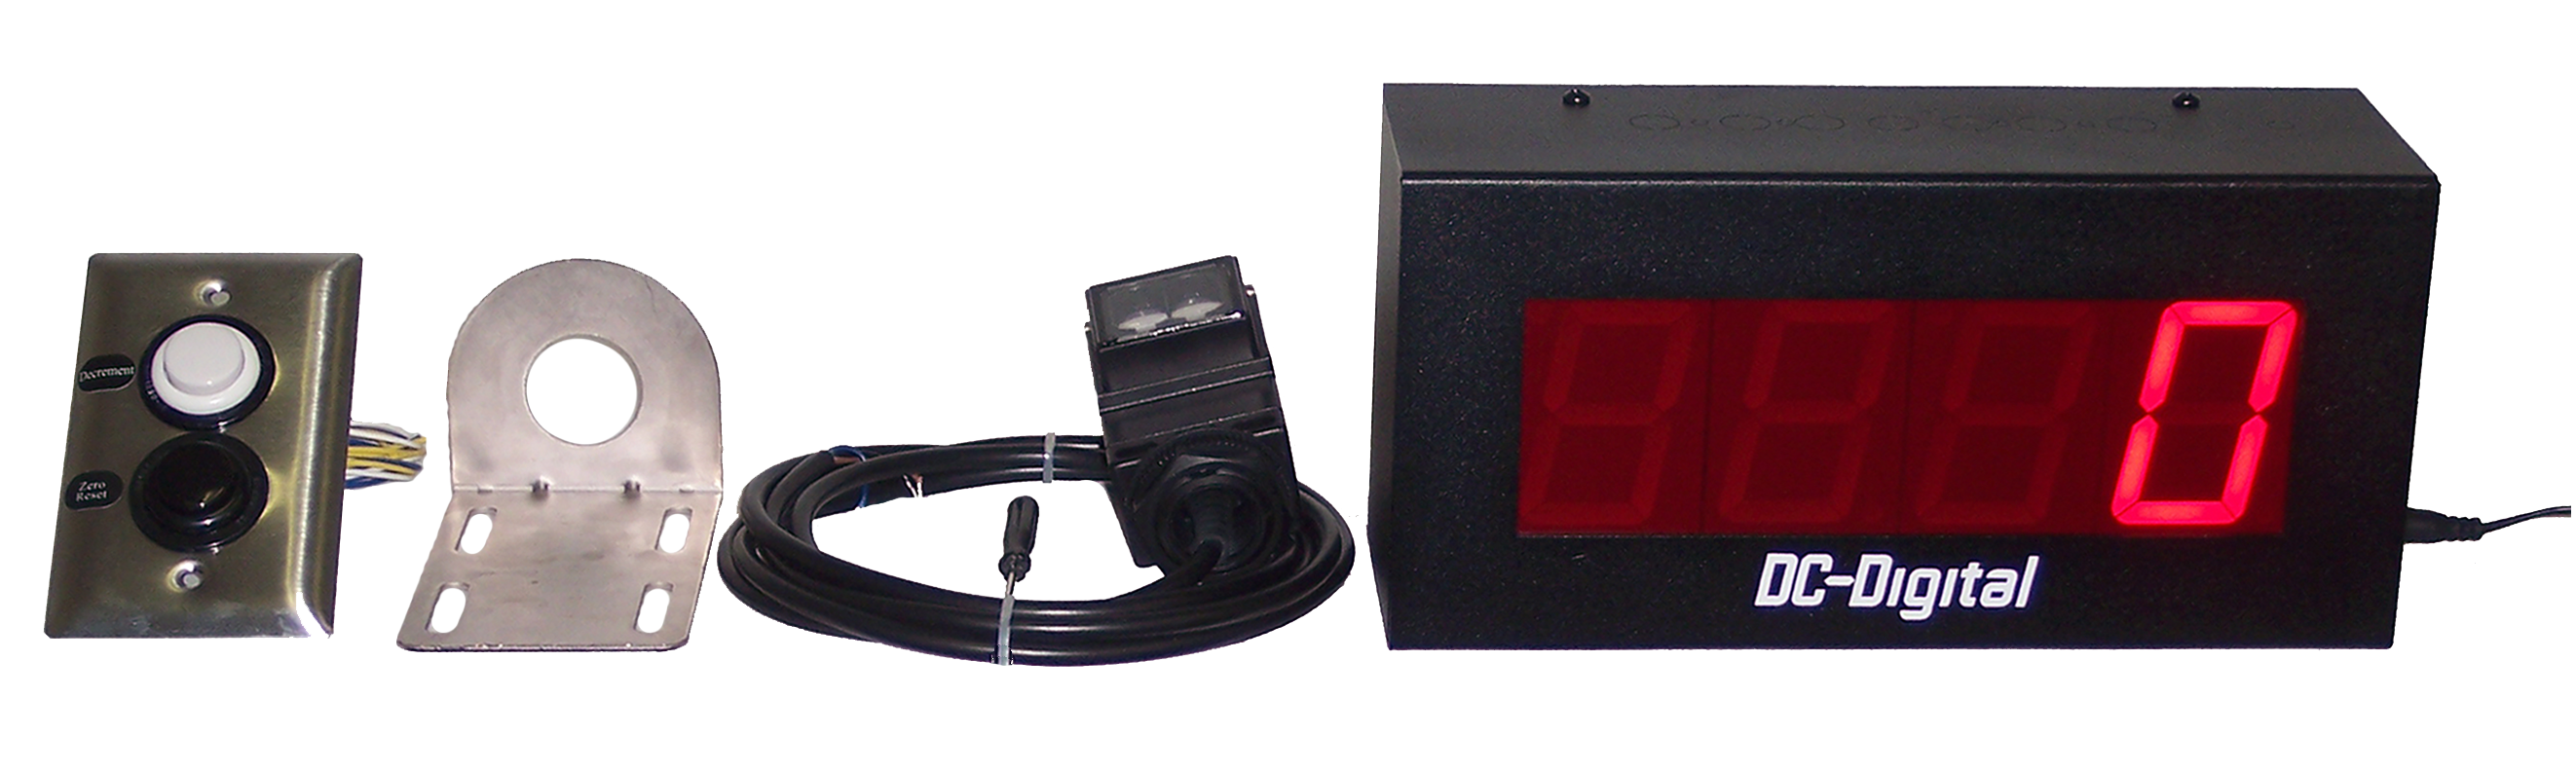 Complete Kit to Count and display objects within 10 ft. of the sensor. 2.3 Inch Display for viewing up to 120 Feet away